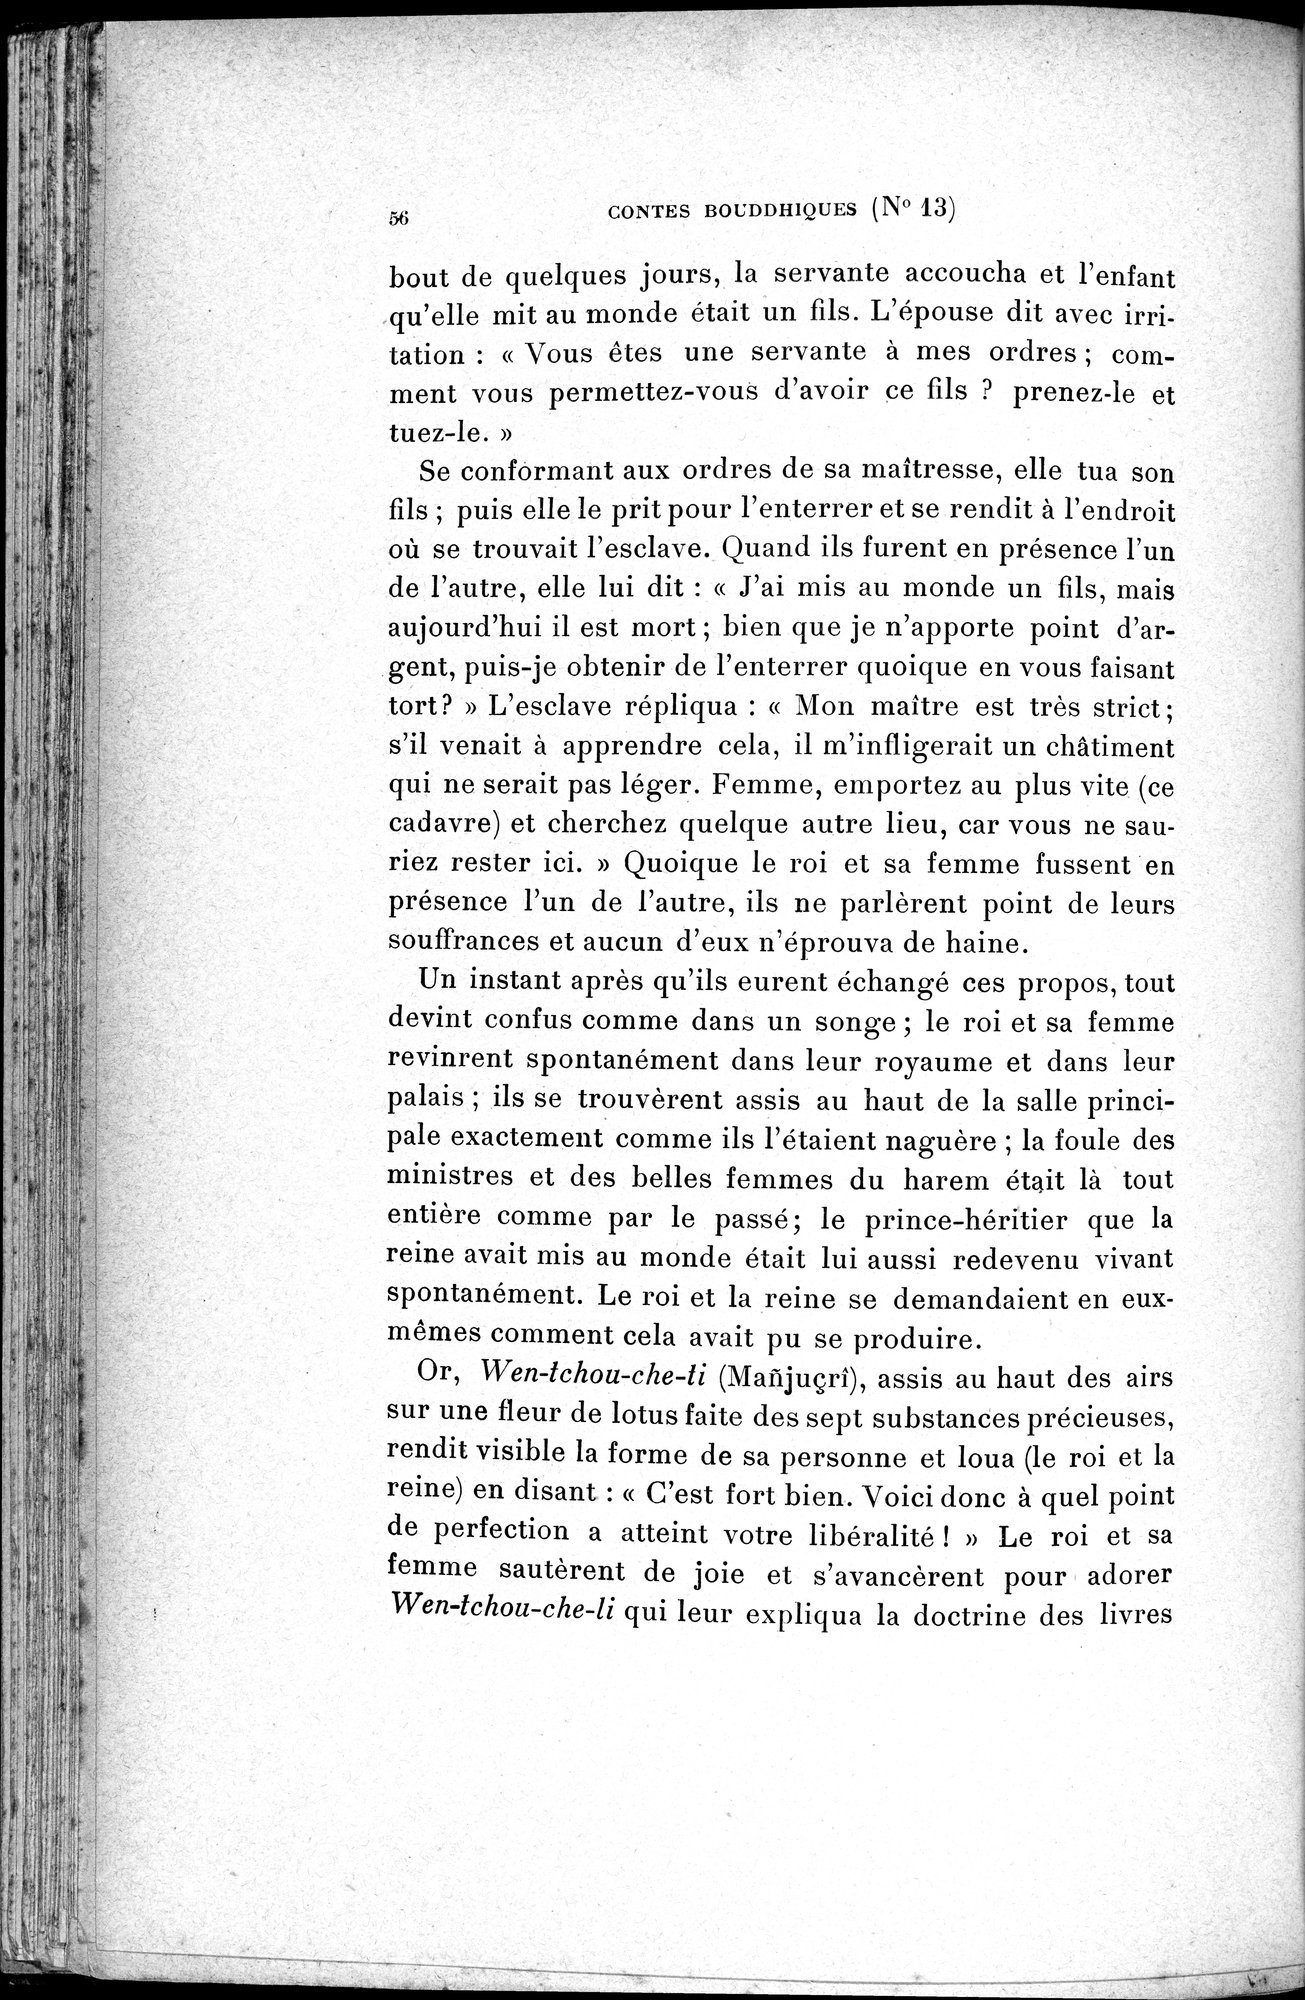 Cinq Cents Contes et Apologues : vol.1 / Page 90 (Grayscale High Resolution Image)